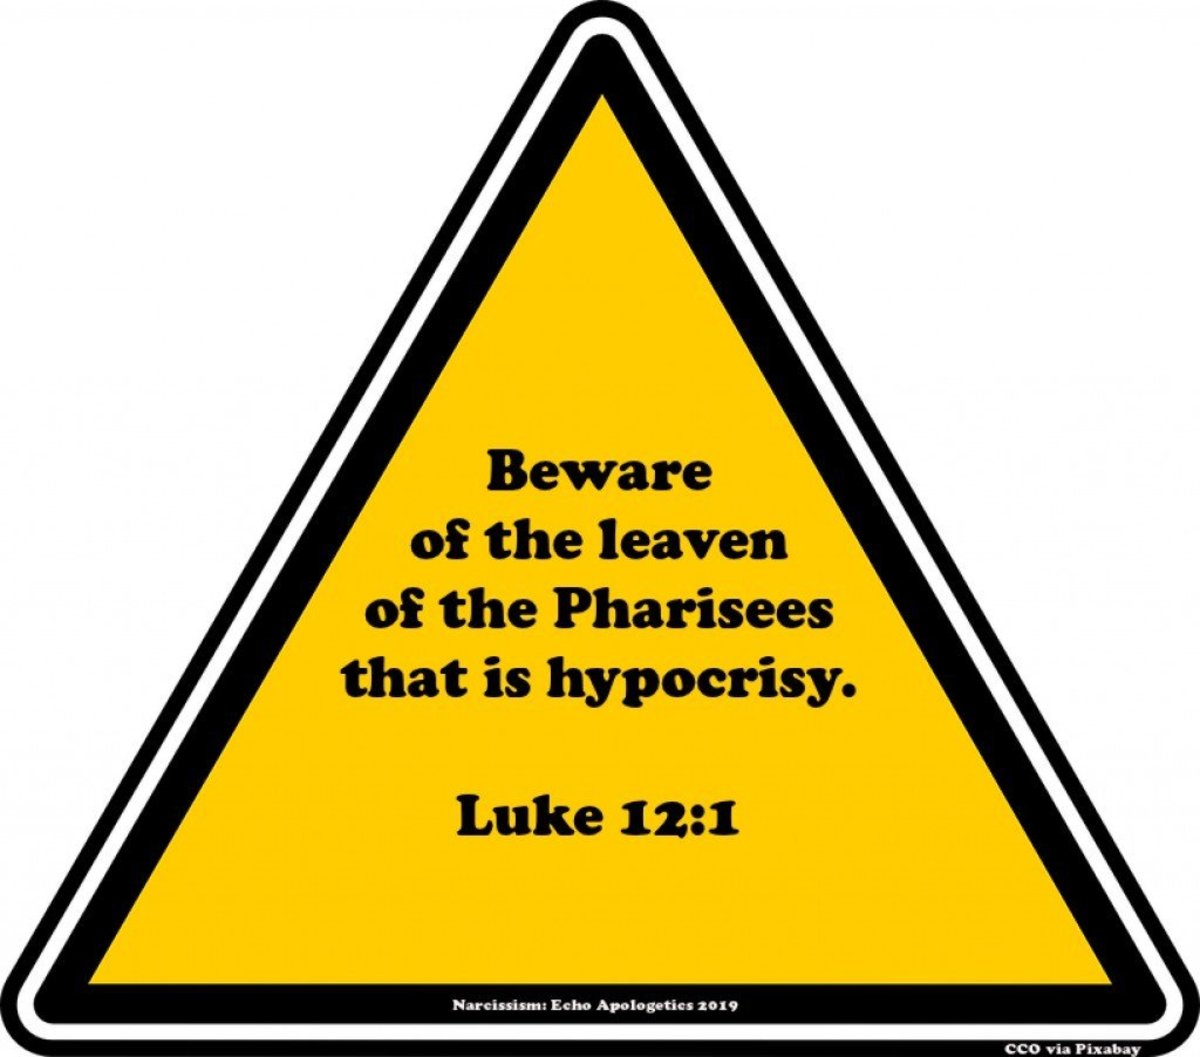 Hypocrites: How to Spot Pharisees